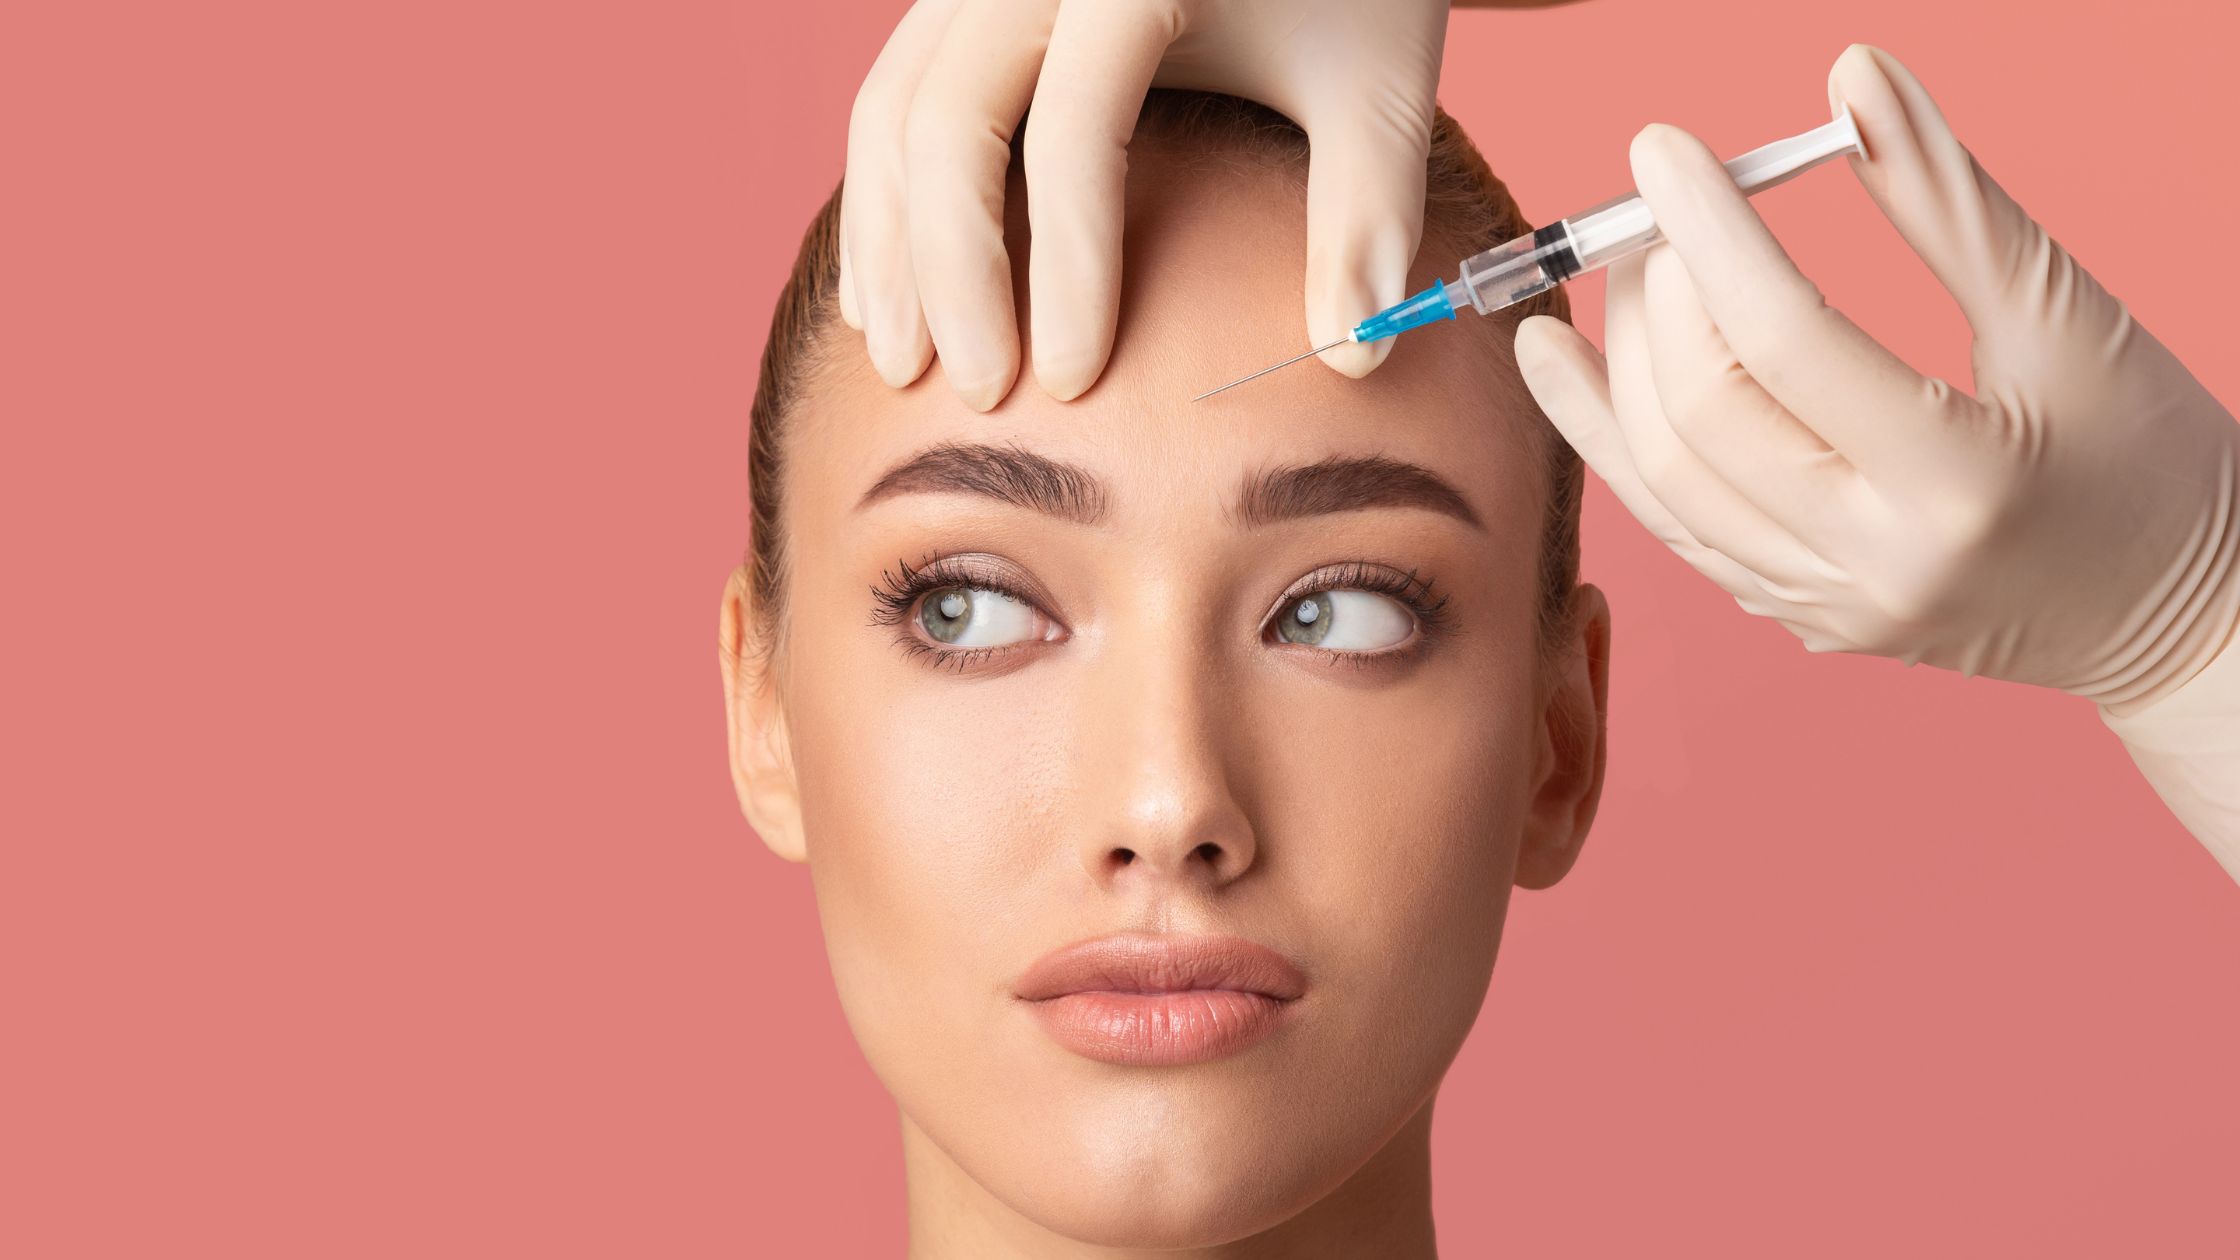 How to Care for Your Skin After Botox